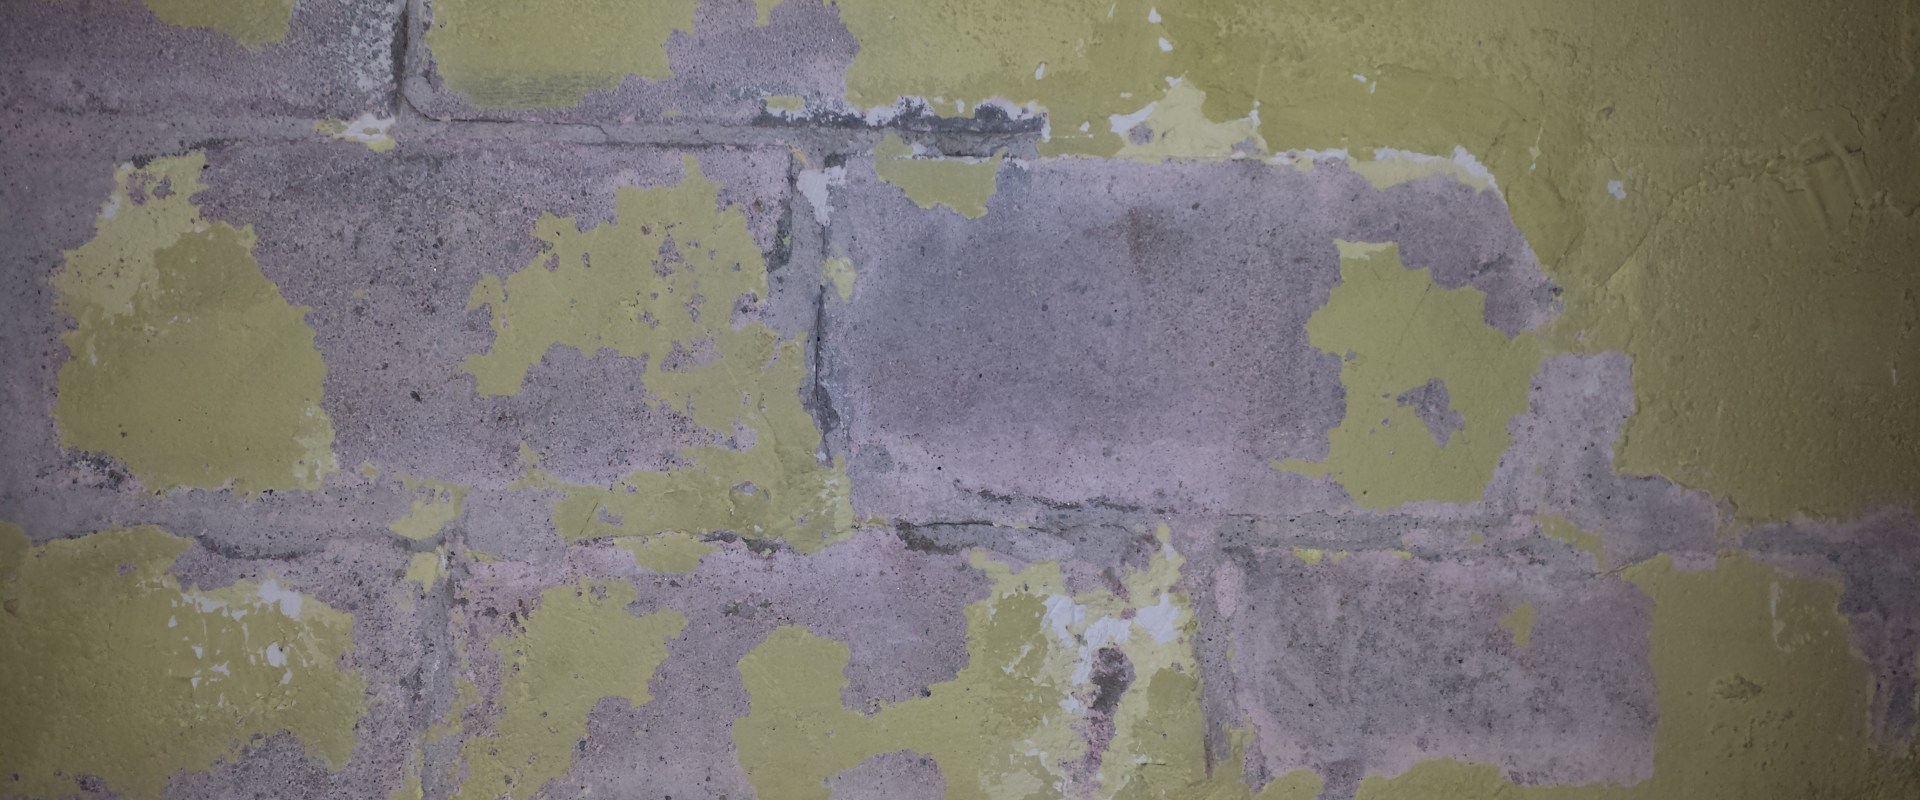 How to Repair a Damaged Cinder Block Wall